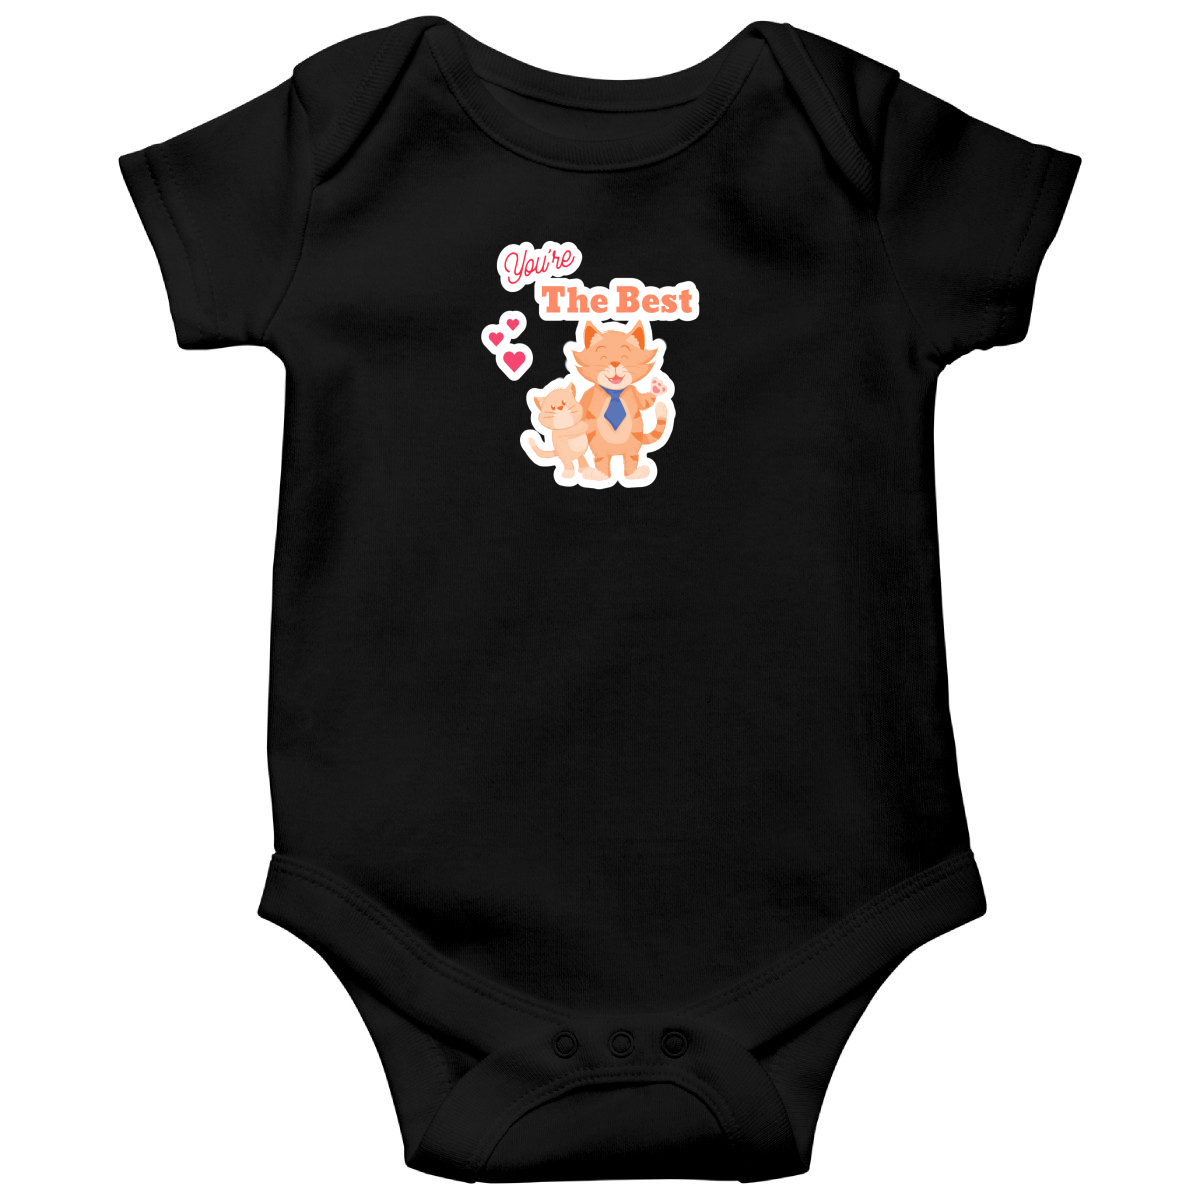 You are the Best Baby Bodysuits | Black